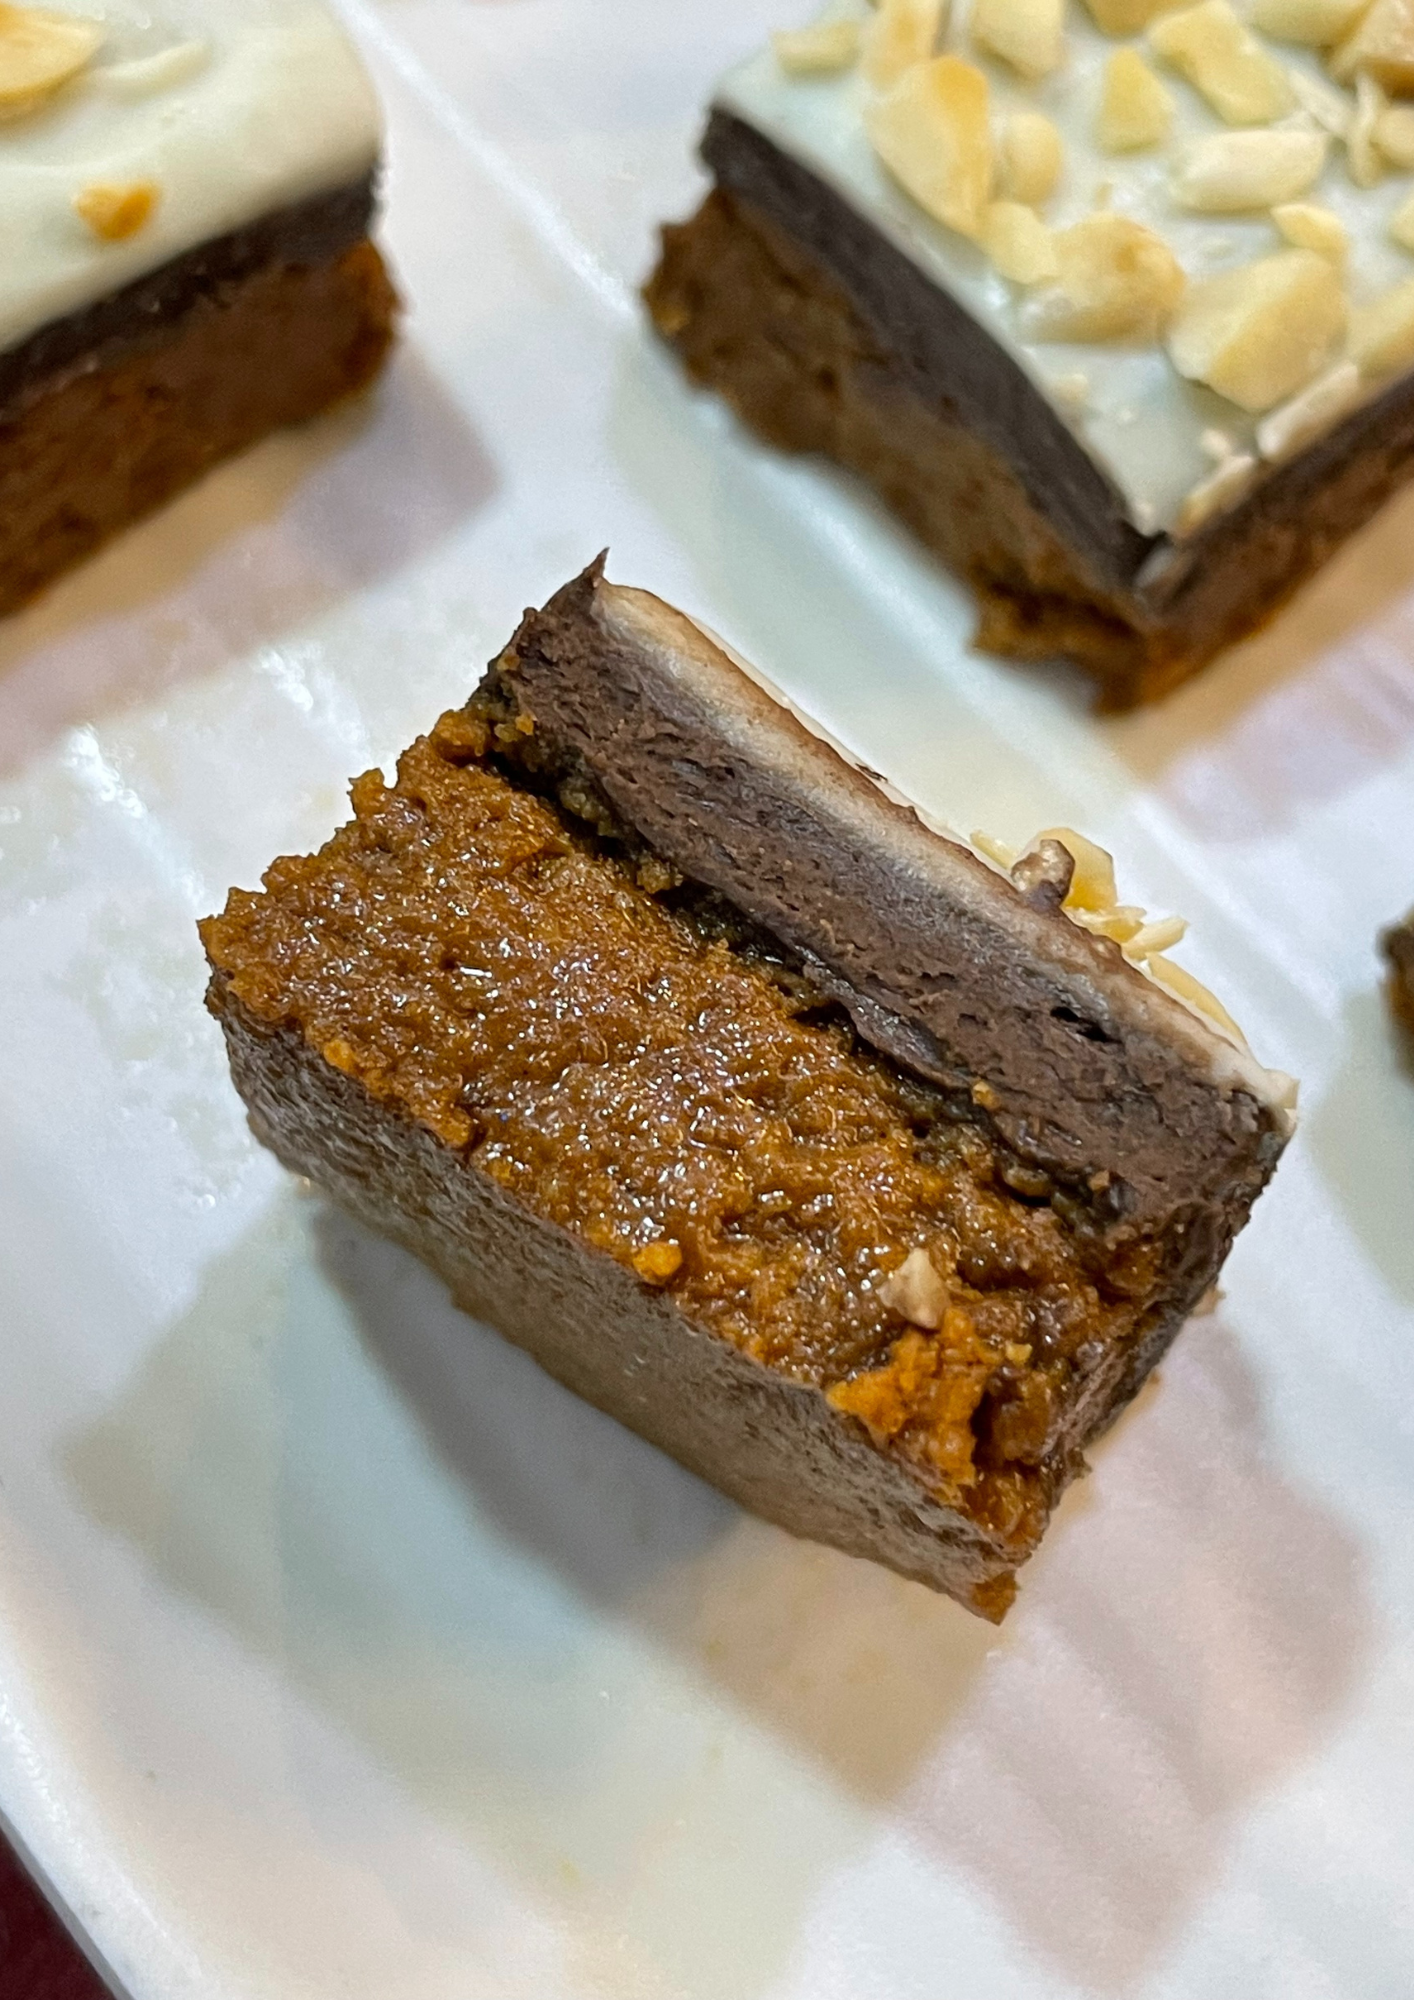 Lotus Biscoff Squares dashed with chocolate & Hazelnuts